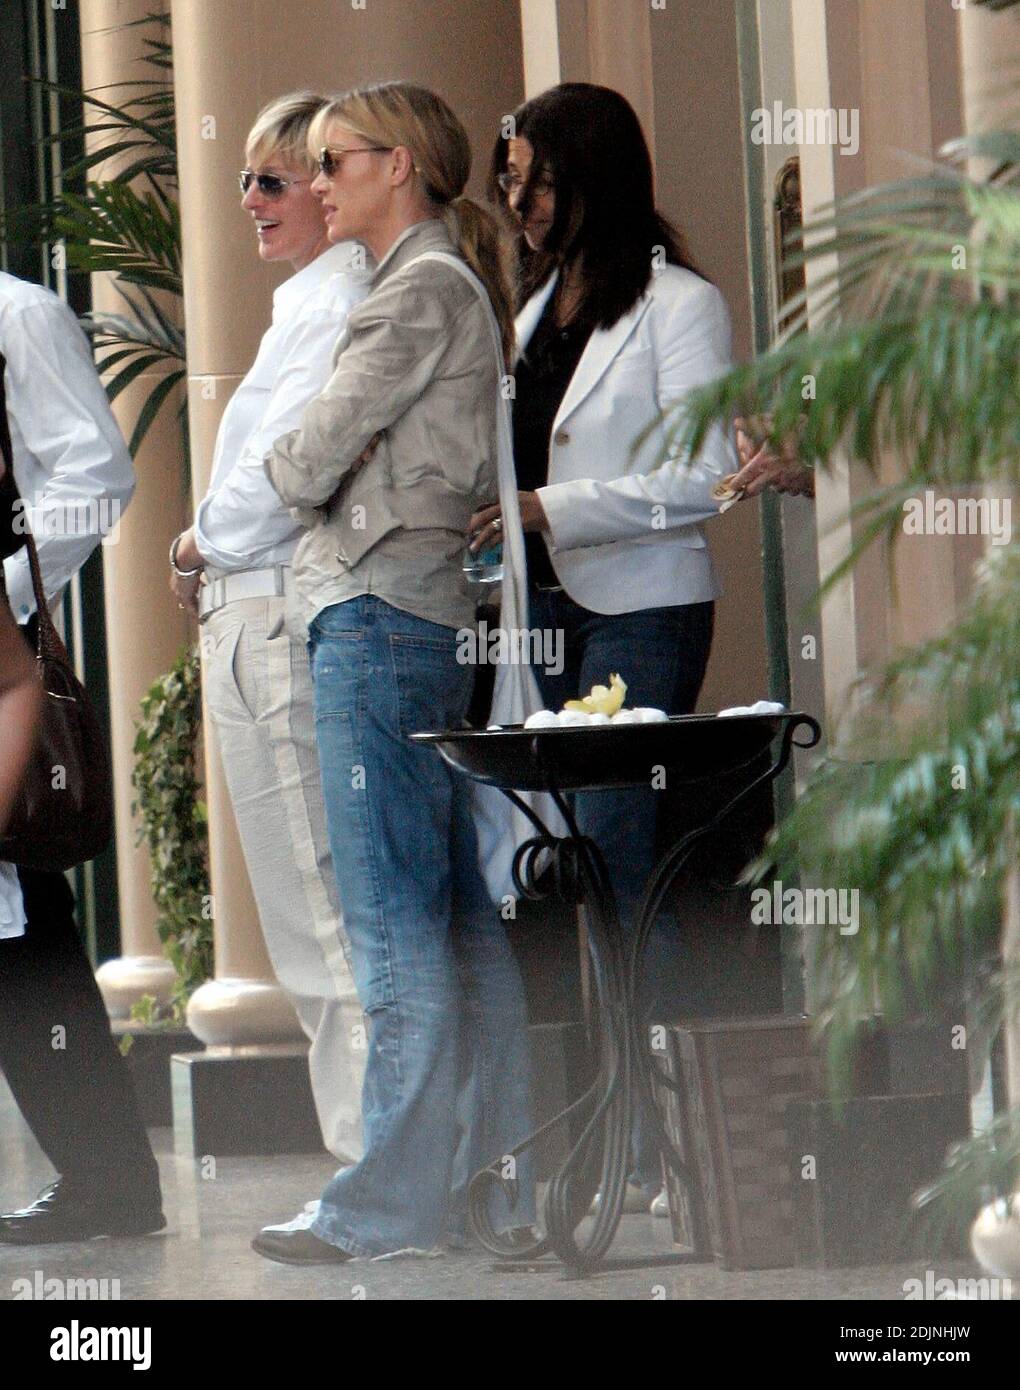 Exclusive!! Ellen DeGeneres and girlfriend Portia de Rossi leave the Regent Beverly Wilshire Hotel in Beverly Hills, Ca. The girls were all smiles as they said farewell to friends and sped off in the Porsche that Portia bought for Ellen for Christmas. 8/2/06 Stock Photo